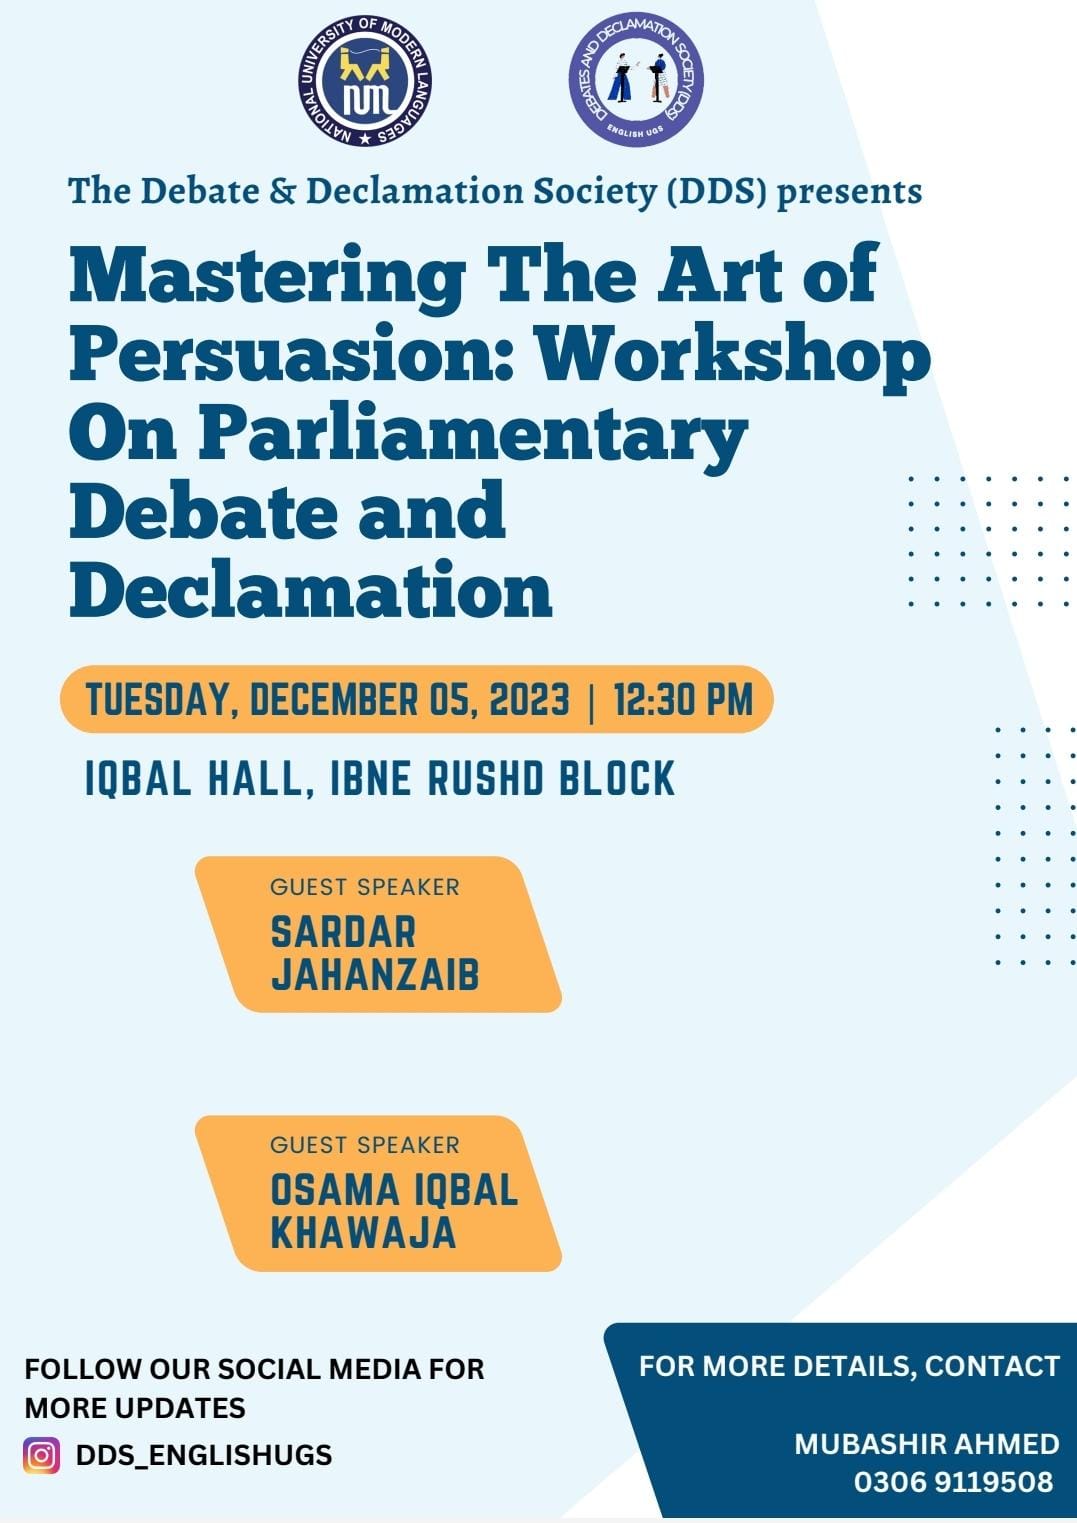 Mastering The Art of Persuasion: Workshop On Parliamentary Debate and Declamation